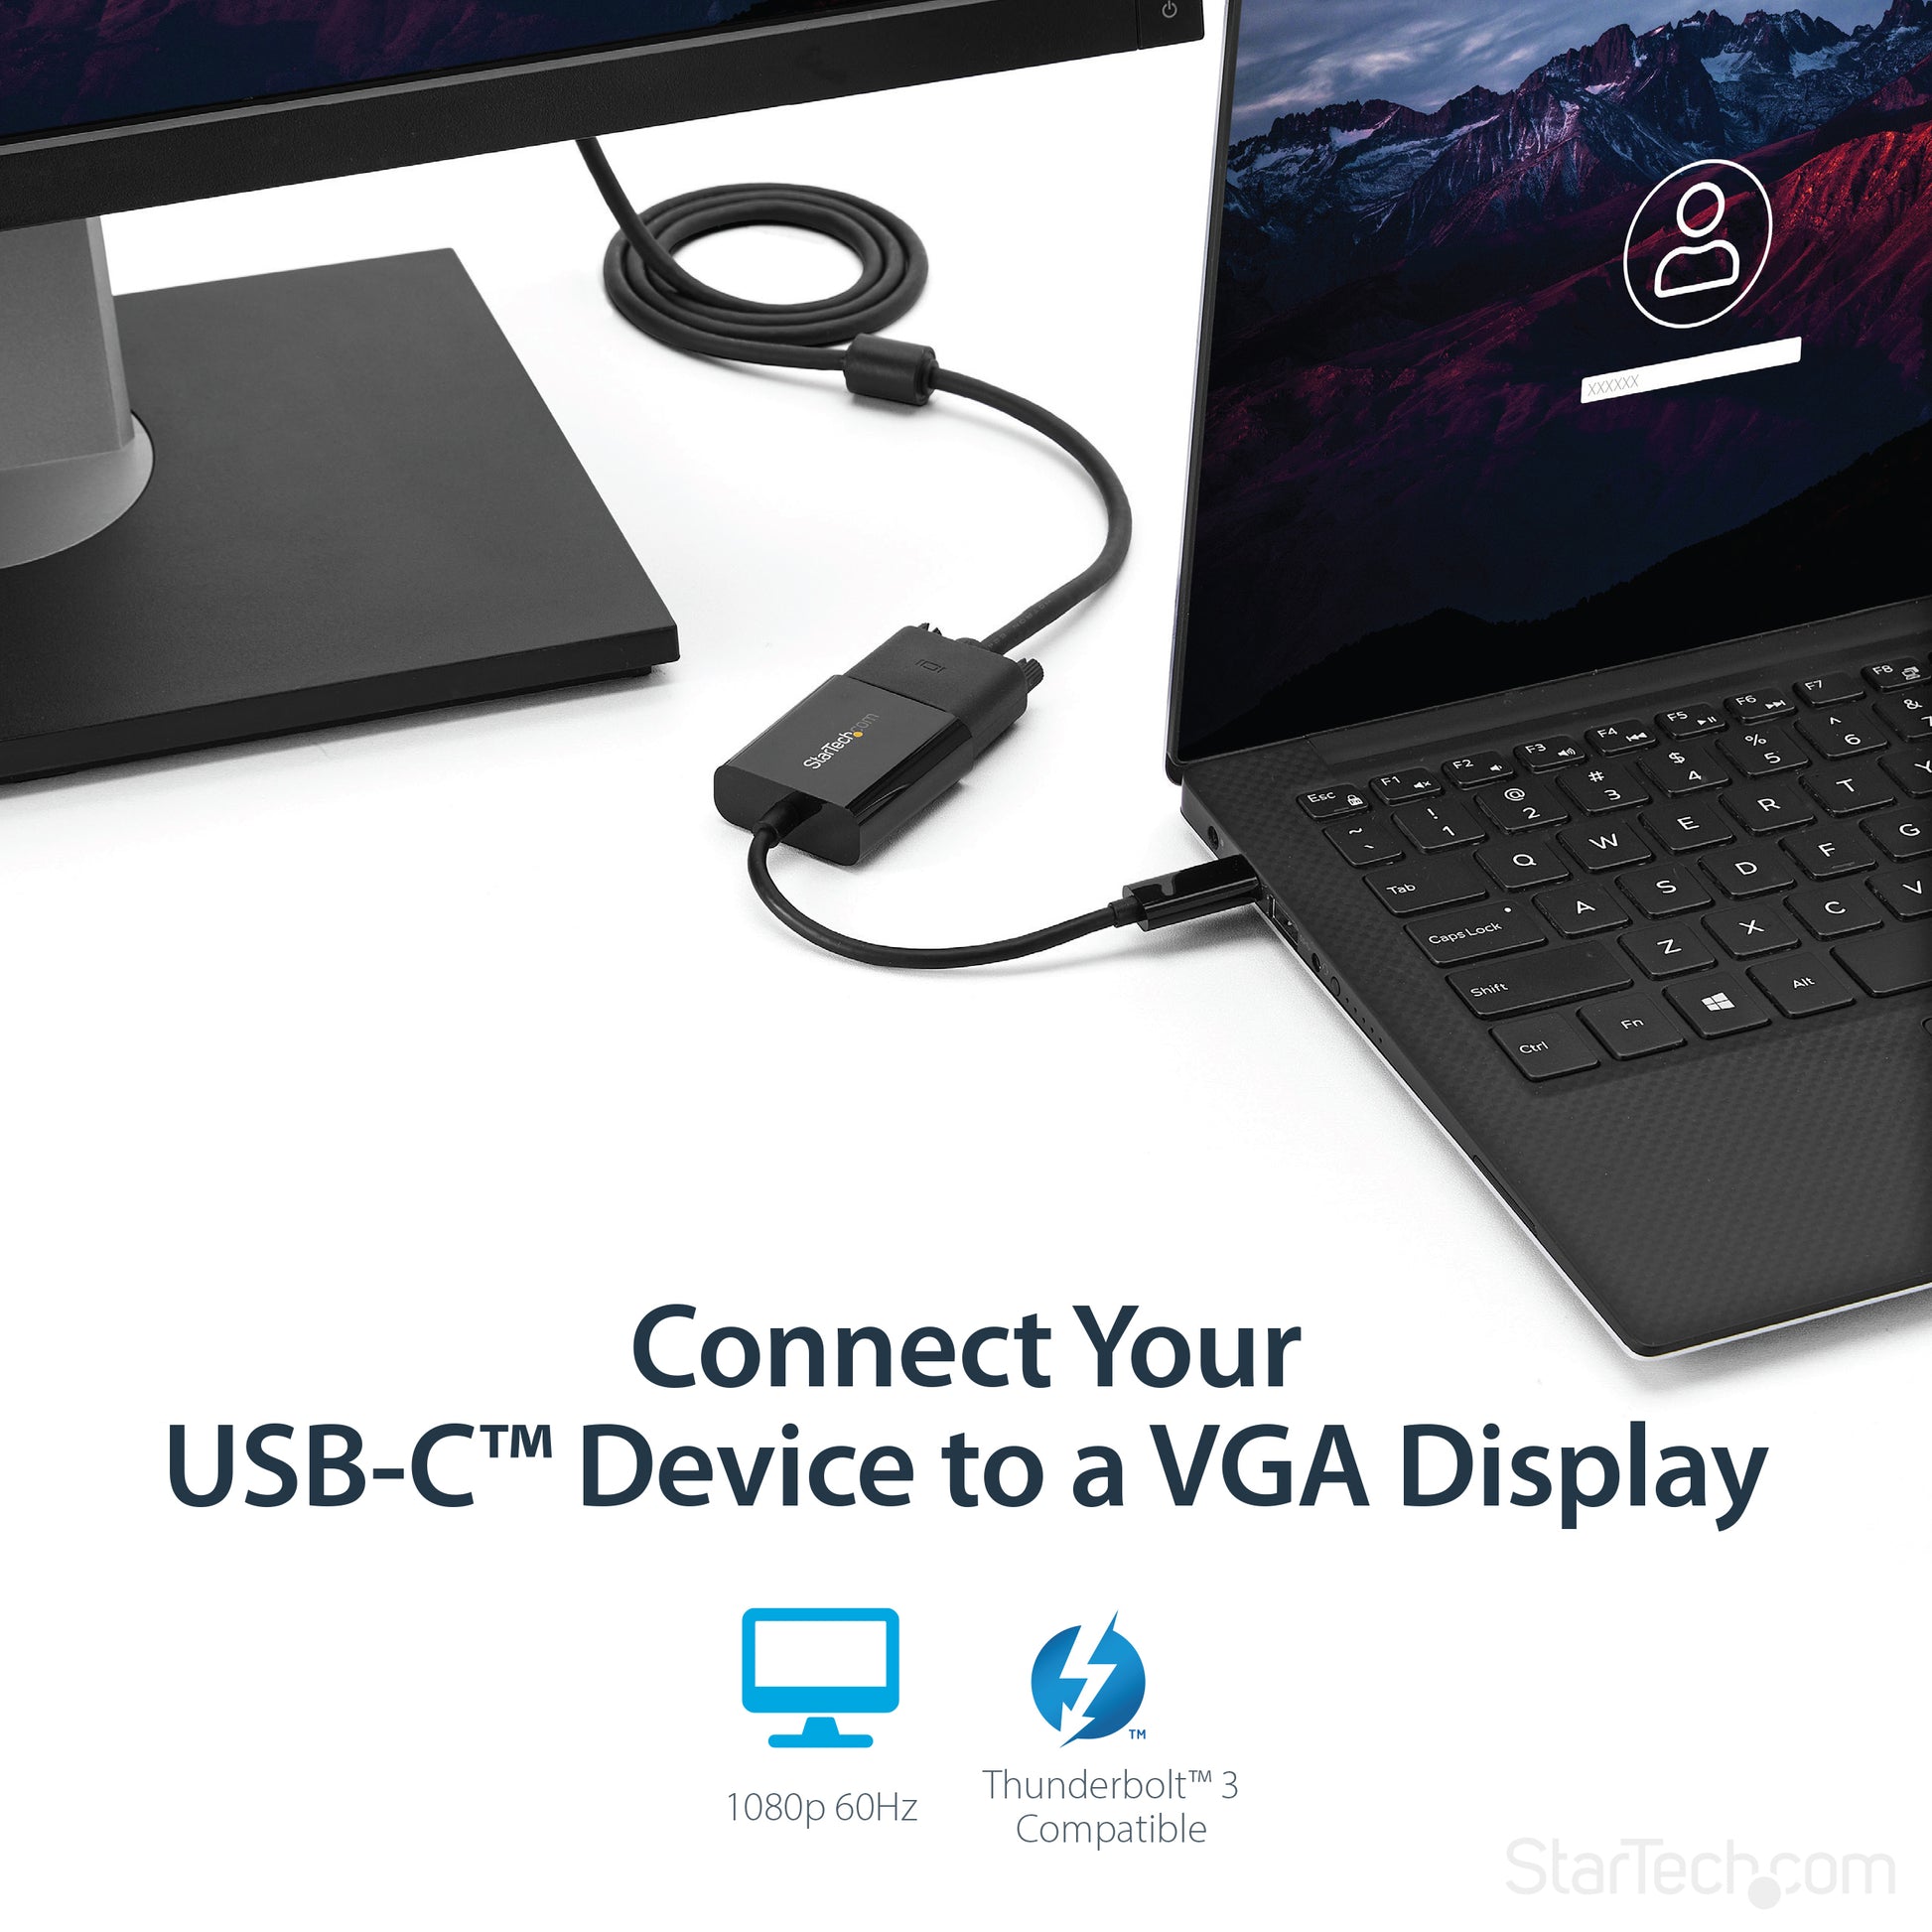 StarTech.com USB-C to VGA Adapter - Black - 1080p - Video Converter For Your MacBook Pro - USB C to VGA Display Dongle - Upgraded Version is CDP2VGAEC-8